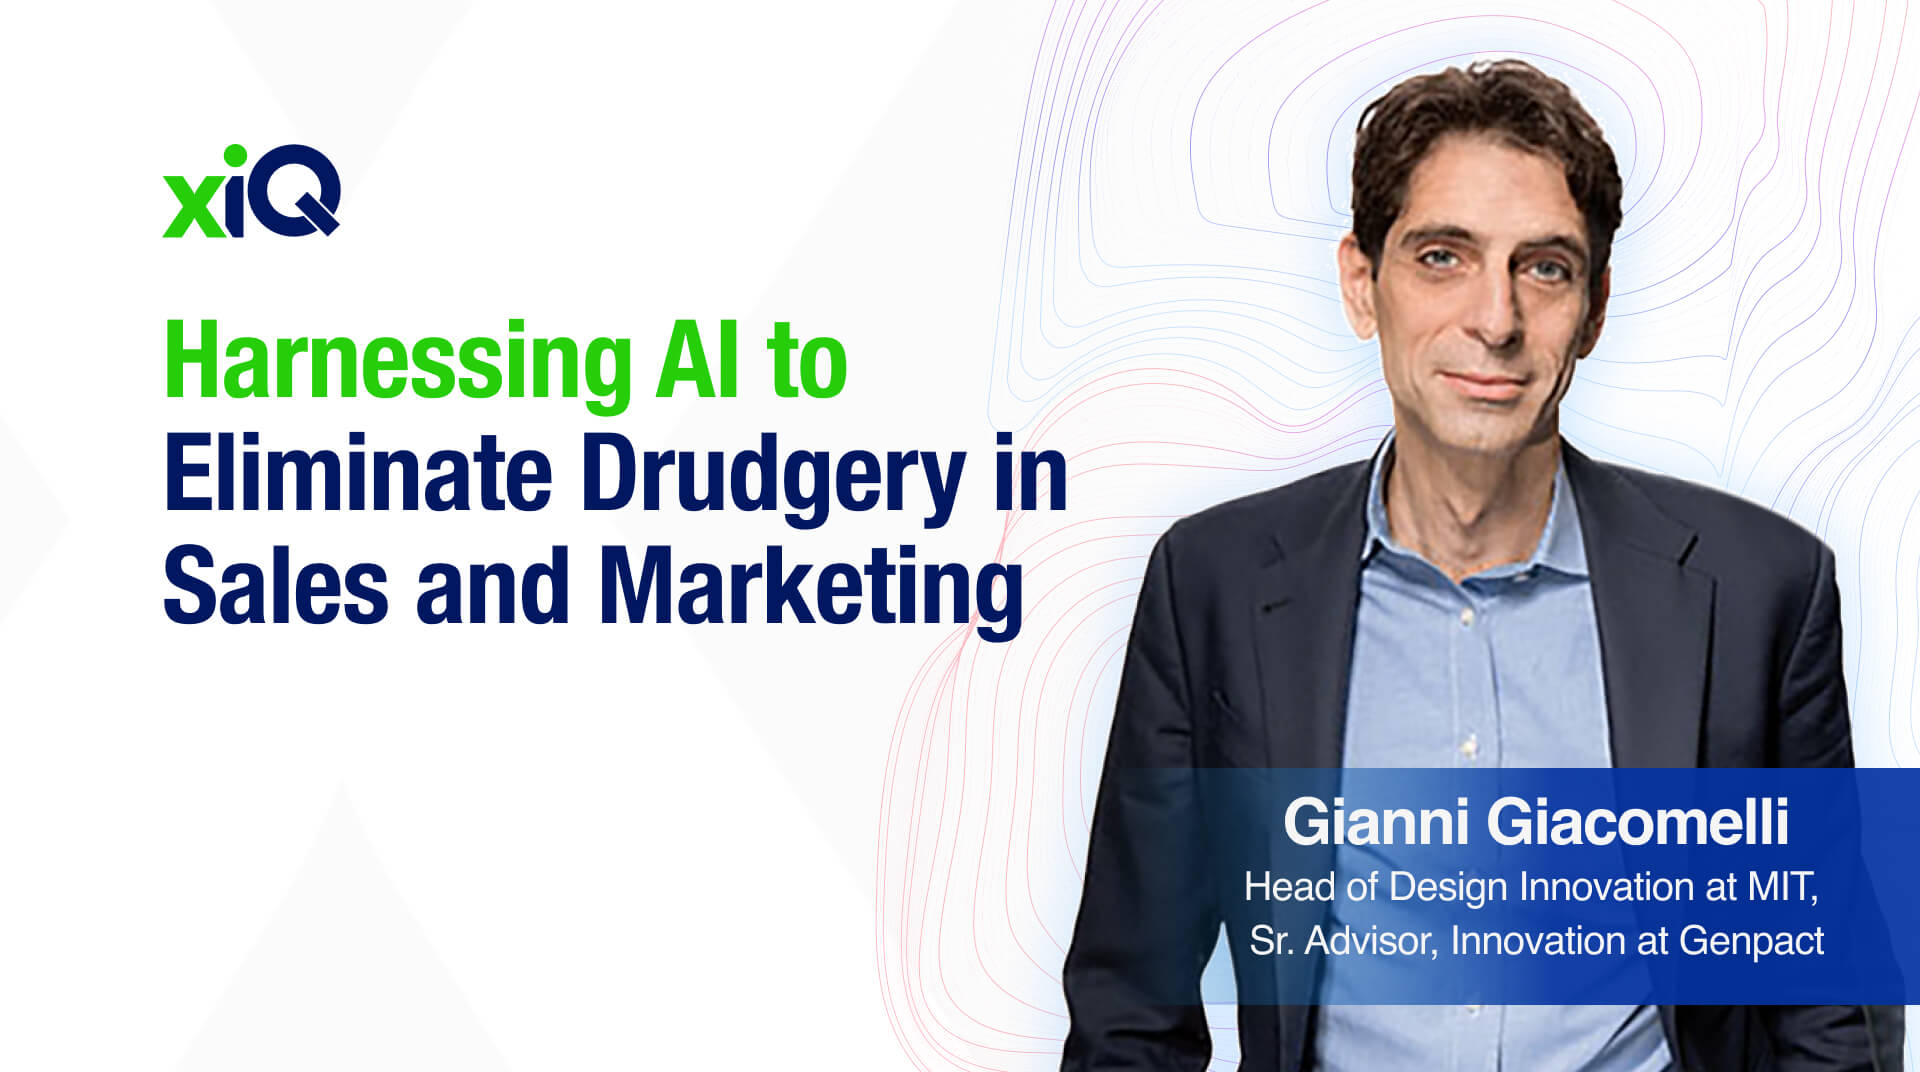 Harnessing AI to Eliminate Drudgery in Sales and Marketing